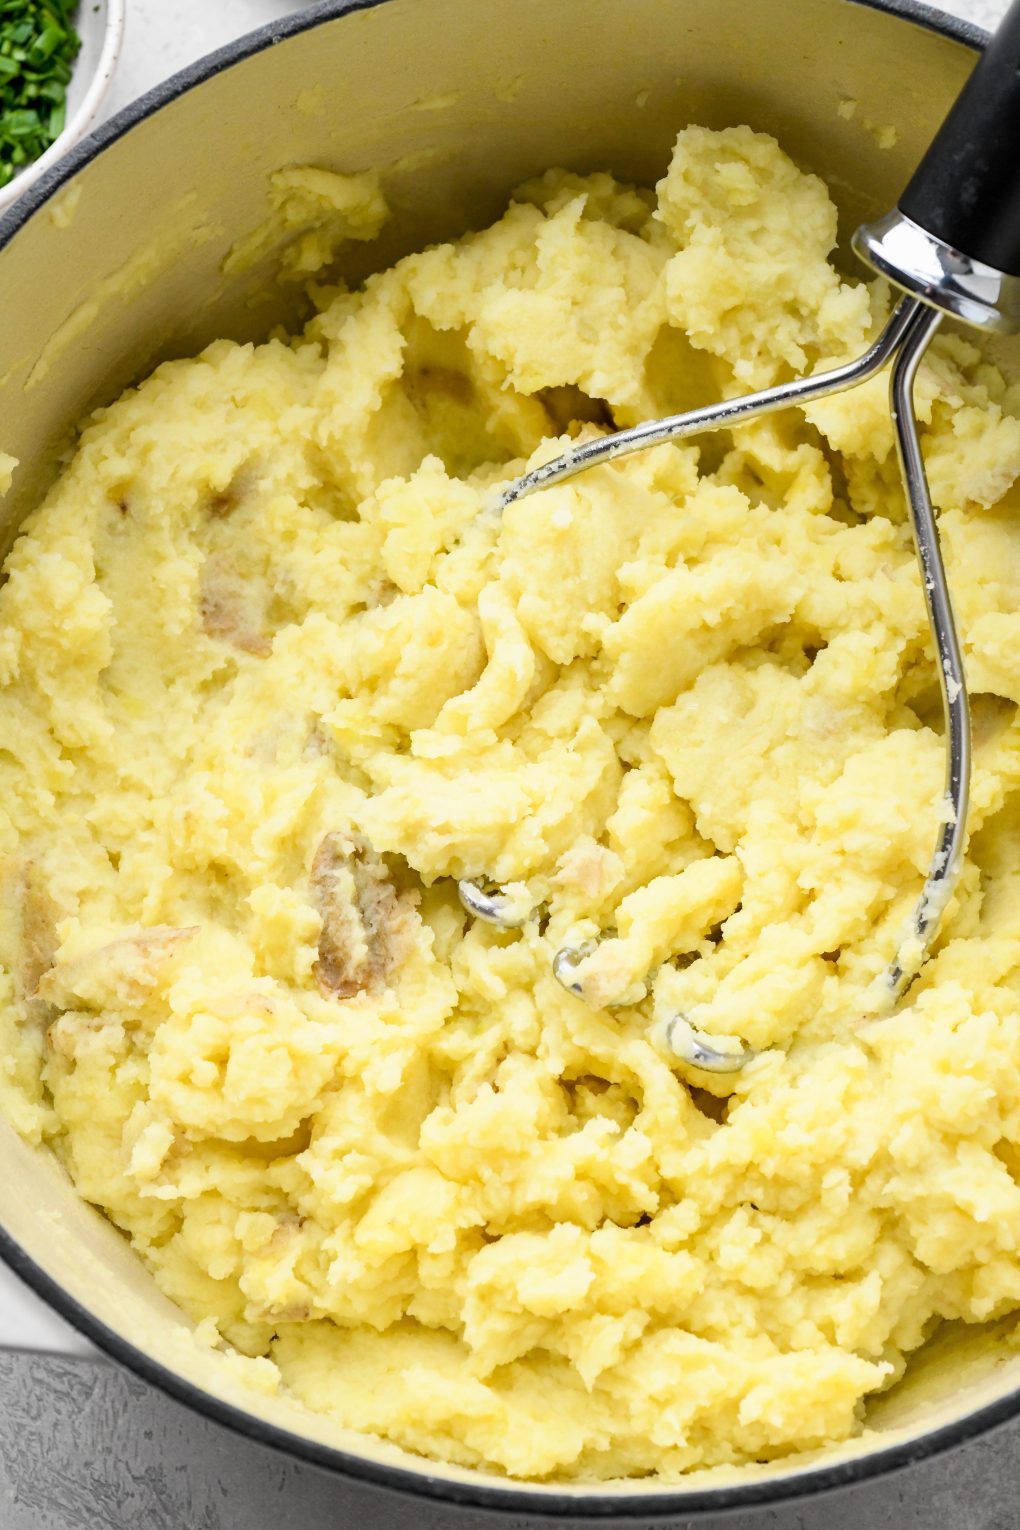 Photos showing how to make Whole30 mashed potatoes - Potatoes being mashed with a potato masher.